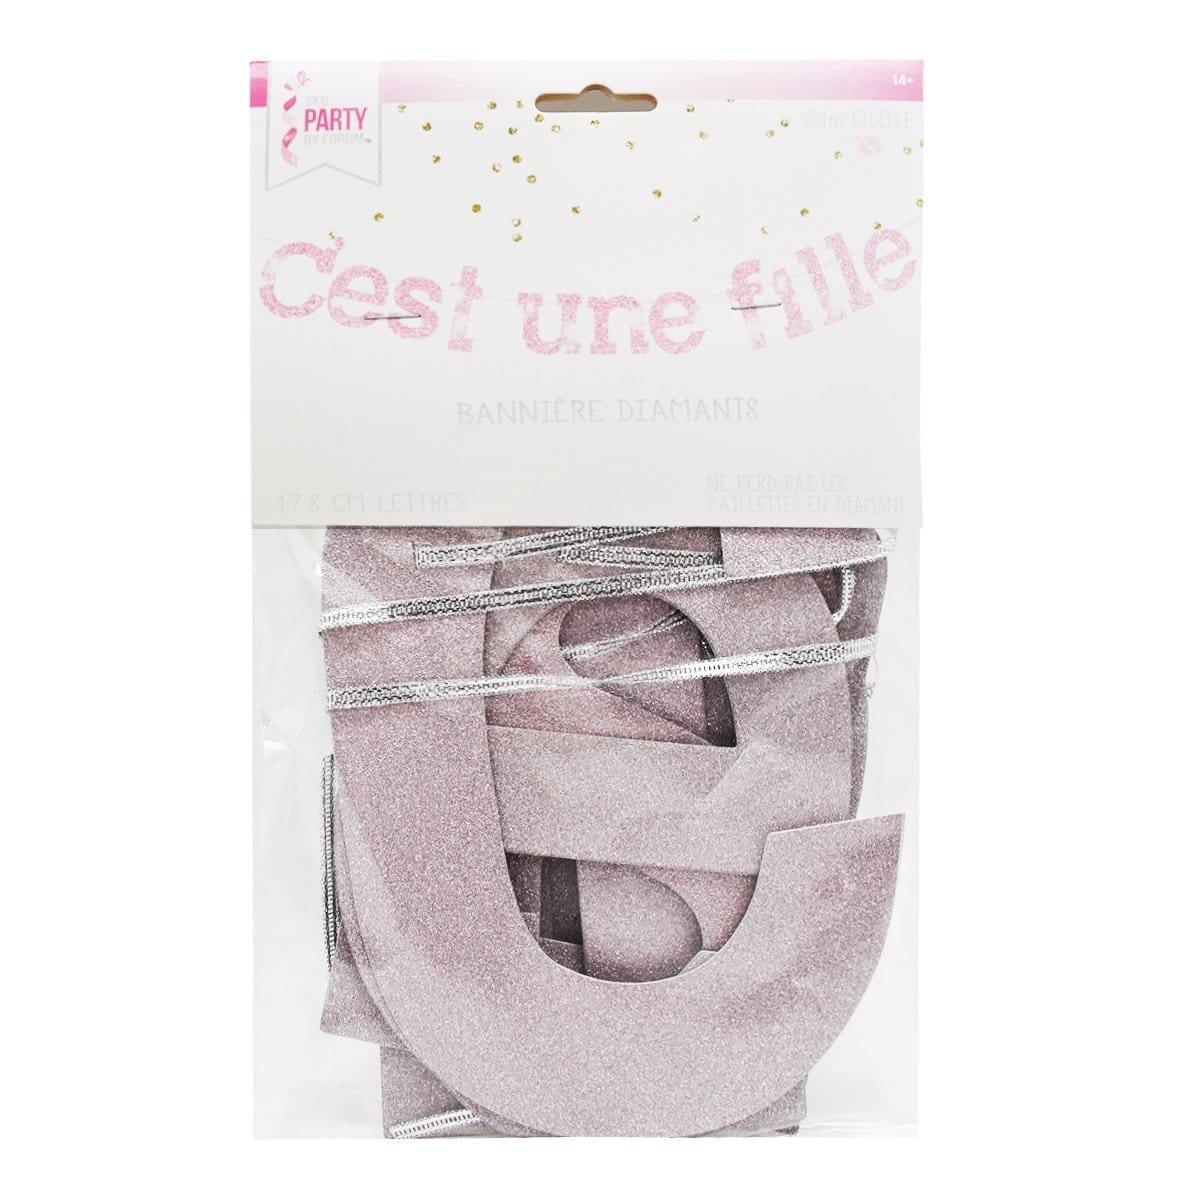 Buy Baby Shower C'est une fille pink diamond banner, 7 inches sold at Party Expert